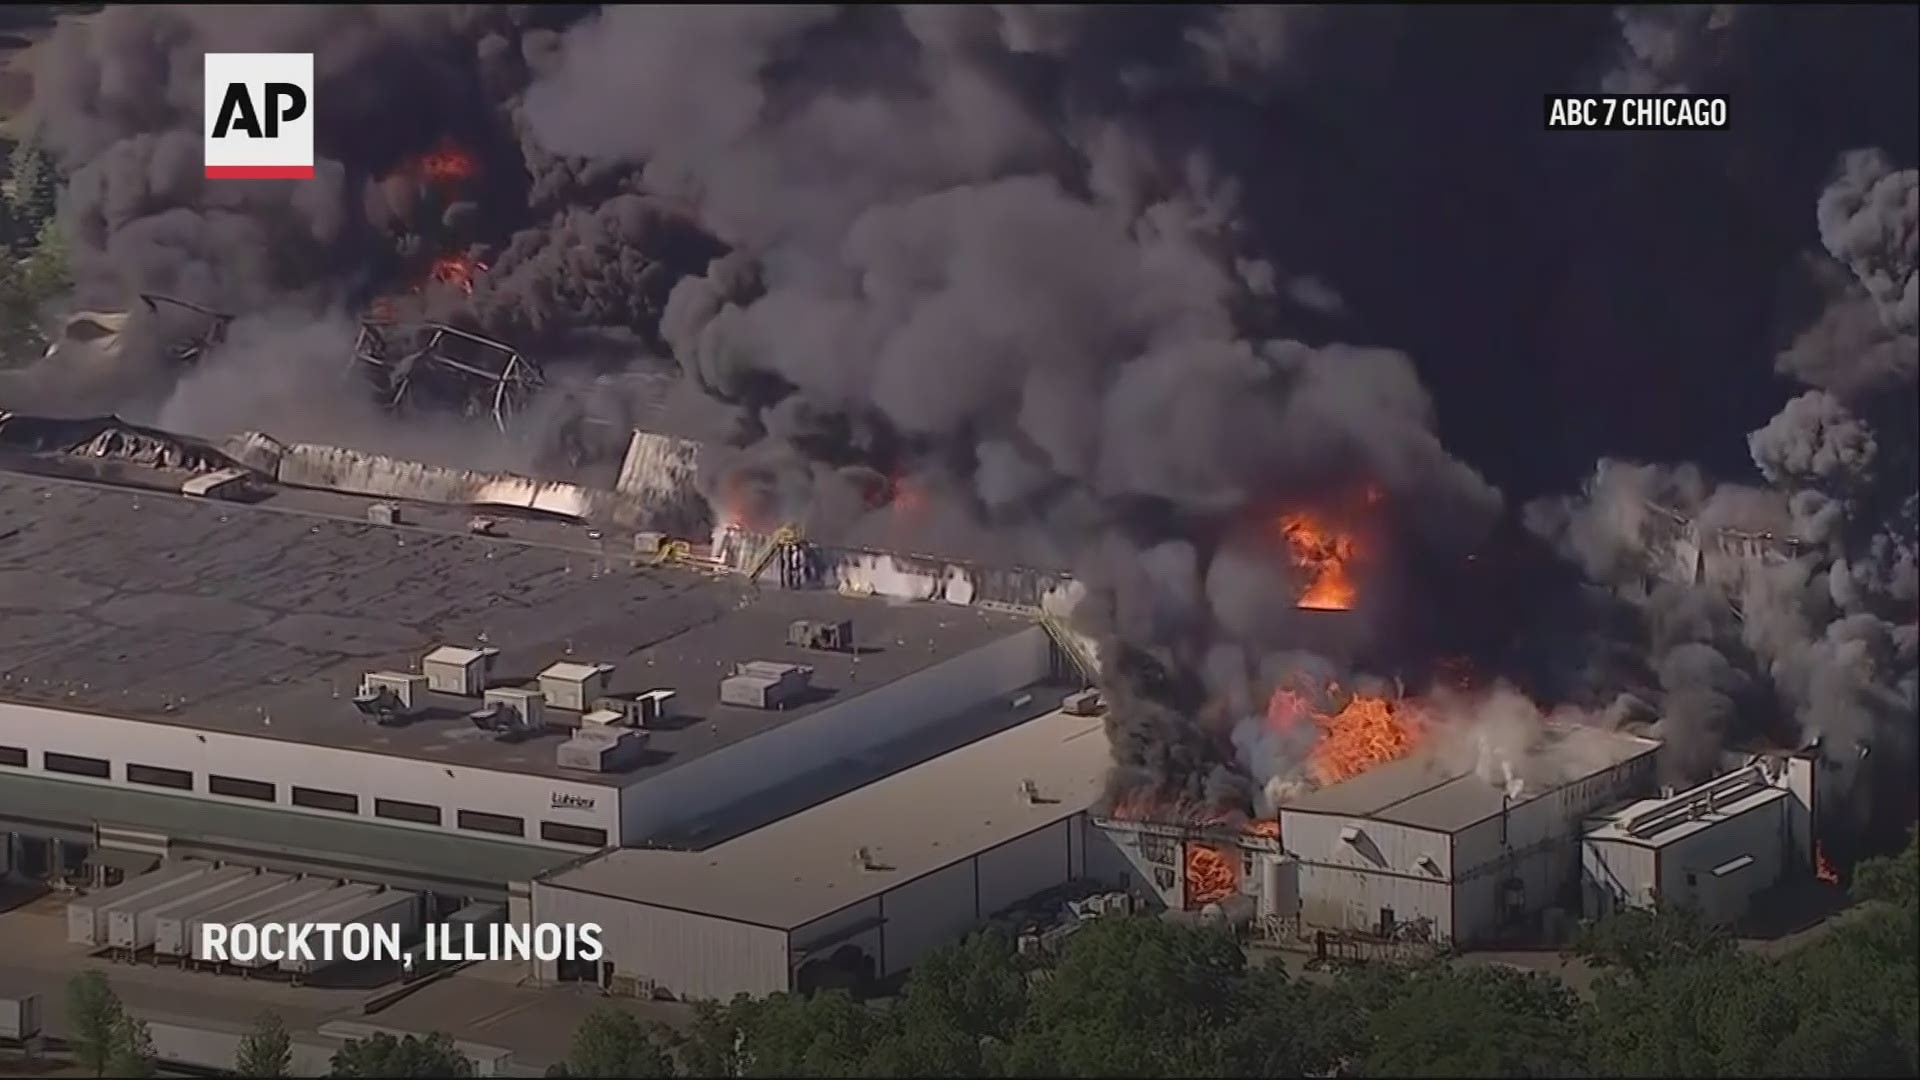 An explosion at a chemical plant near the northern Illinois community of Rockton sparked a massive fire that sent flames and huge plumes of thick smoke into the air.